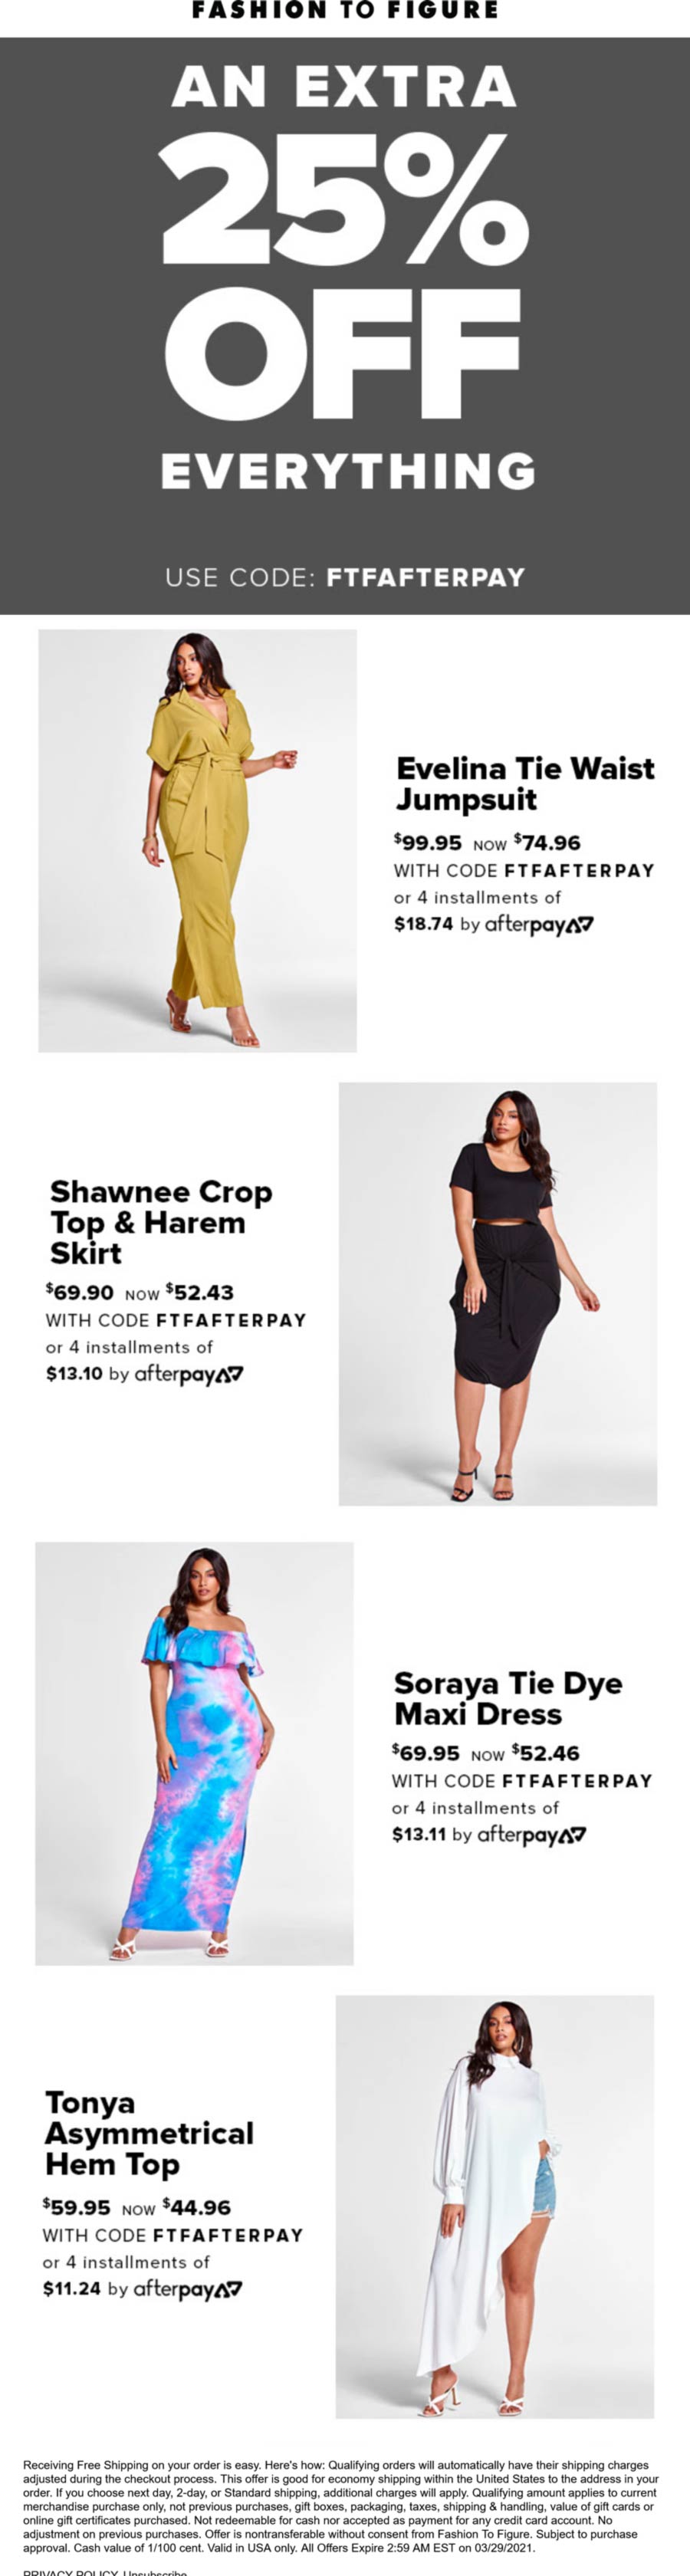 Fashion to Figure stores Coupon  Extra 25% off everything today at Fashion to Figure via promo code FTFAFTERPAY #fashiontofigure 